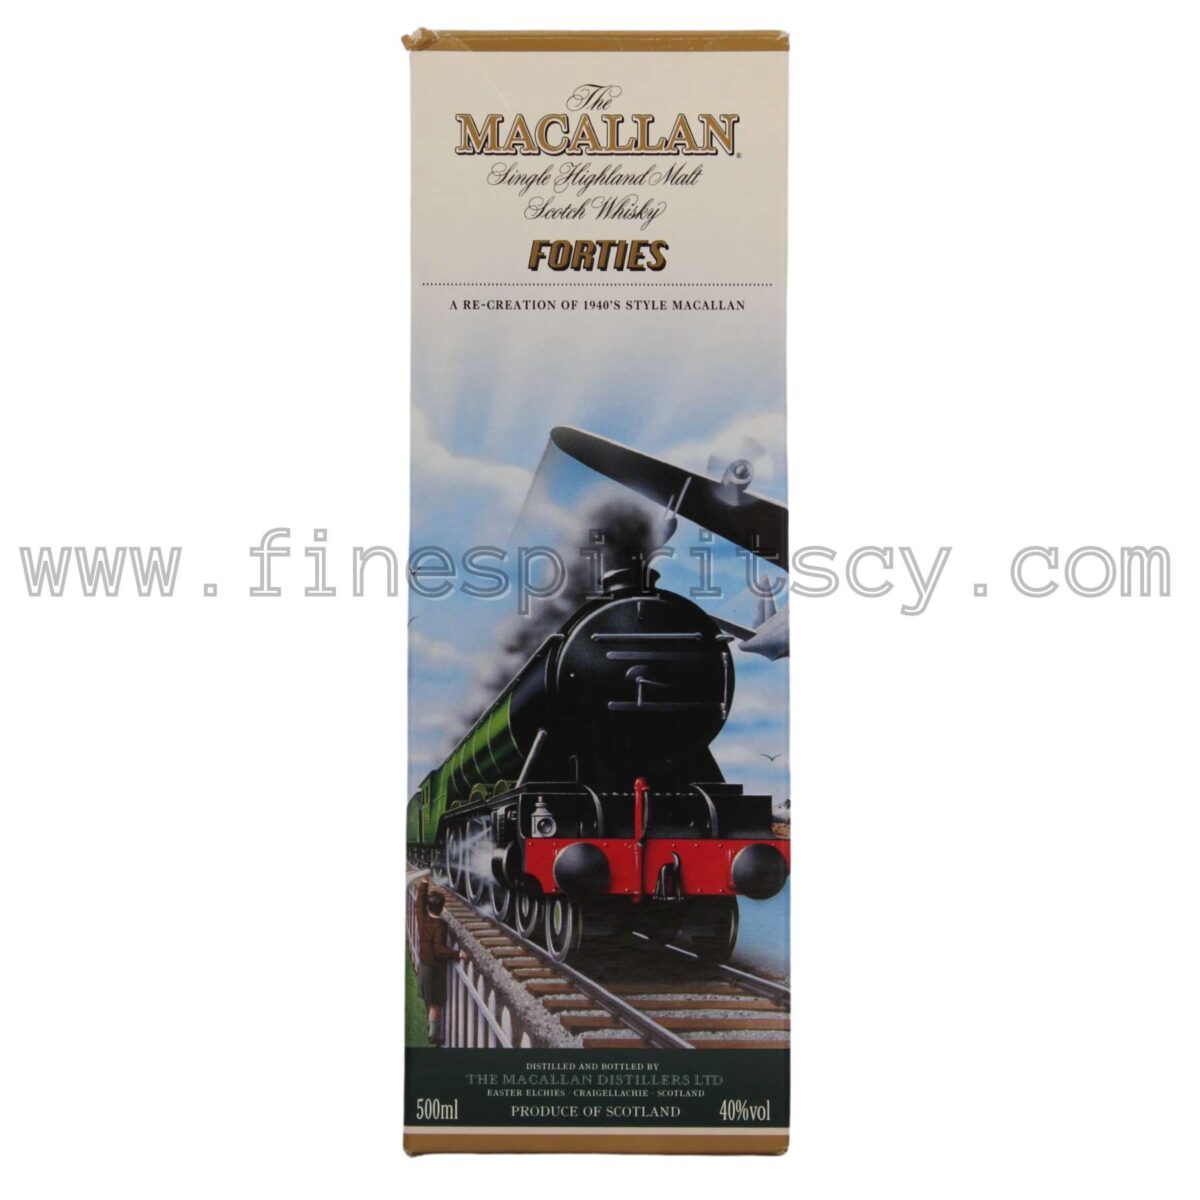 Macallan 1940s Forties Cyprus Price FSCY Limited Edition Collection Travel Series Retail